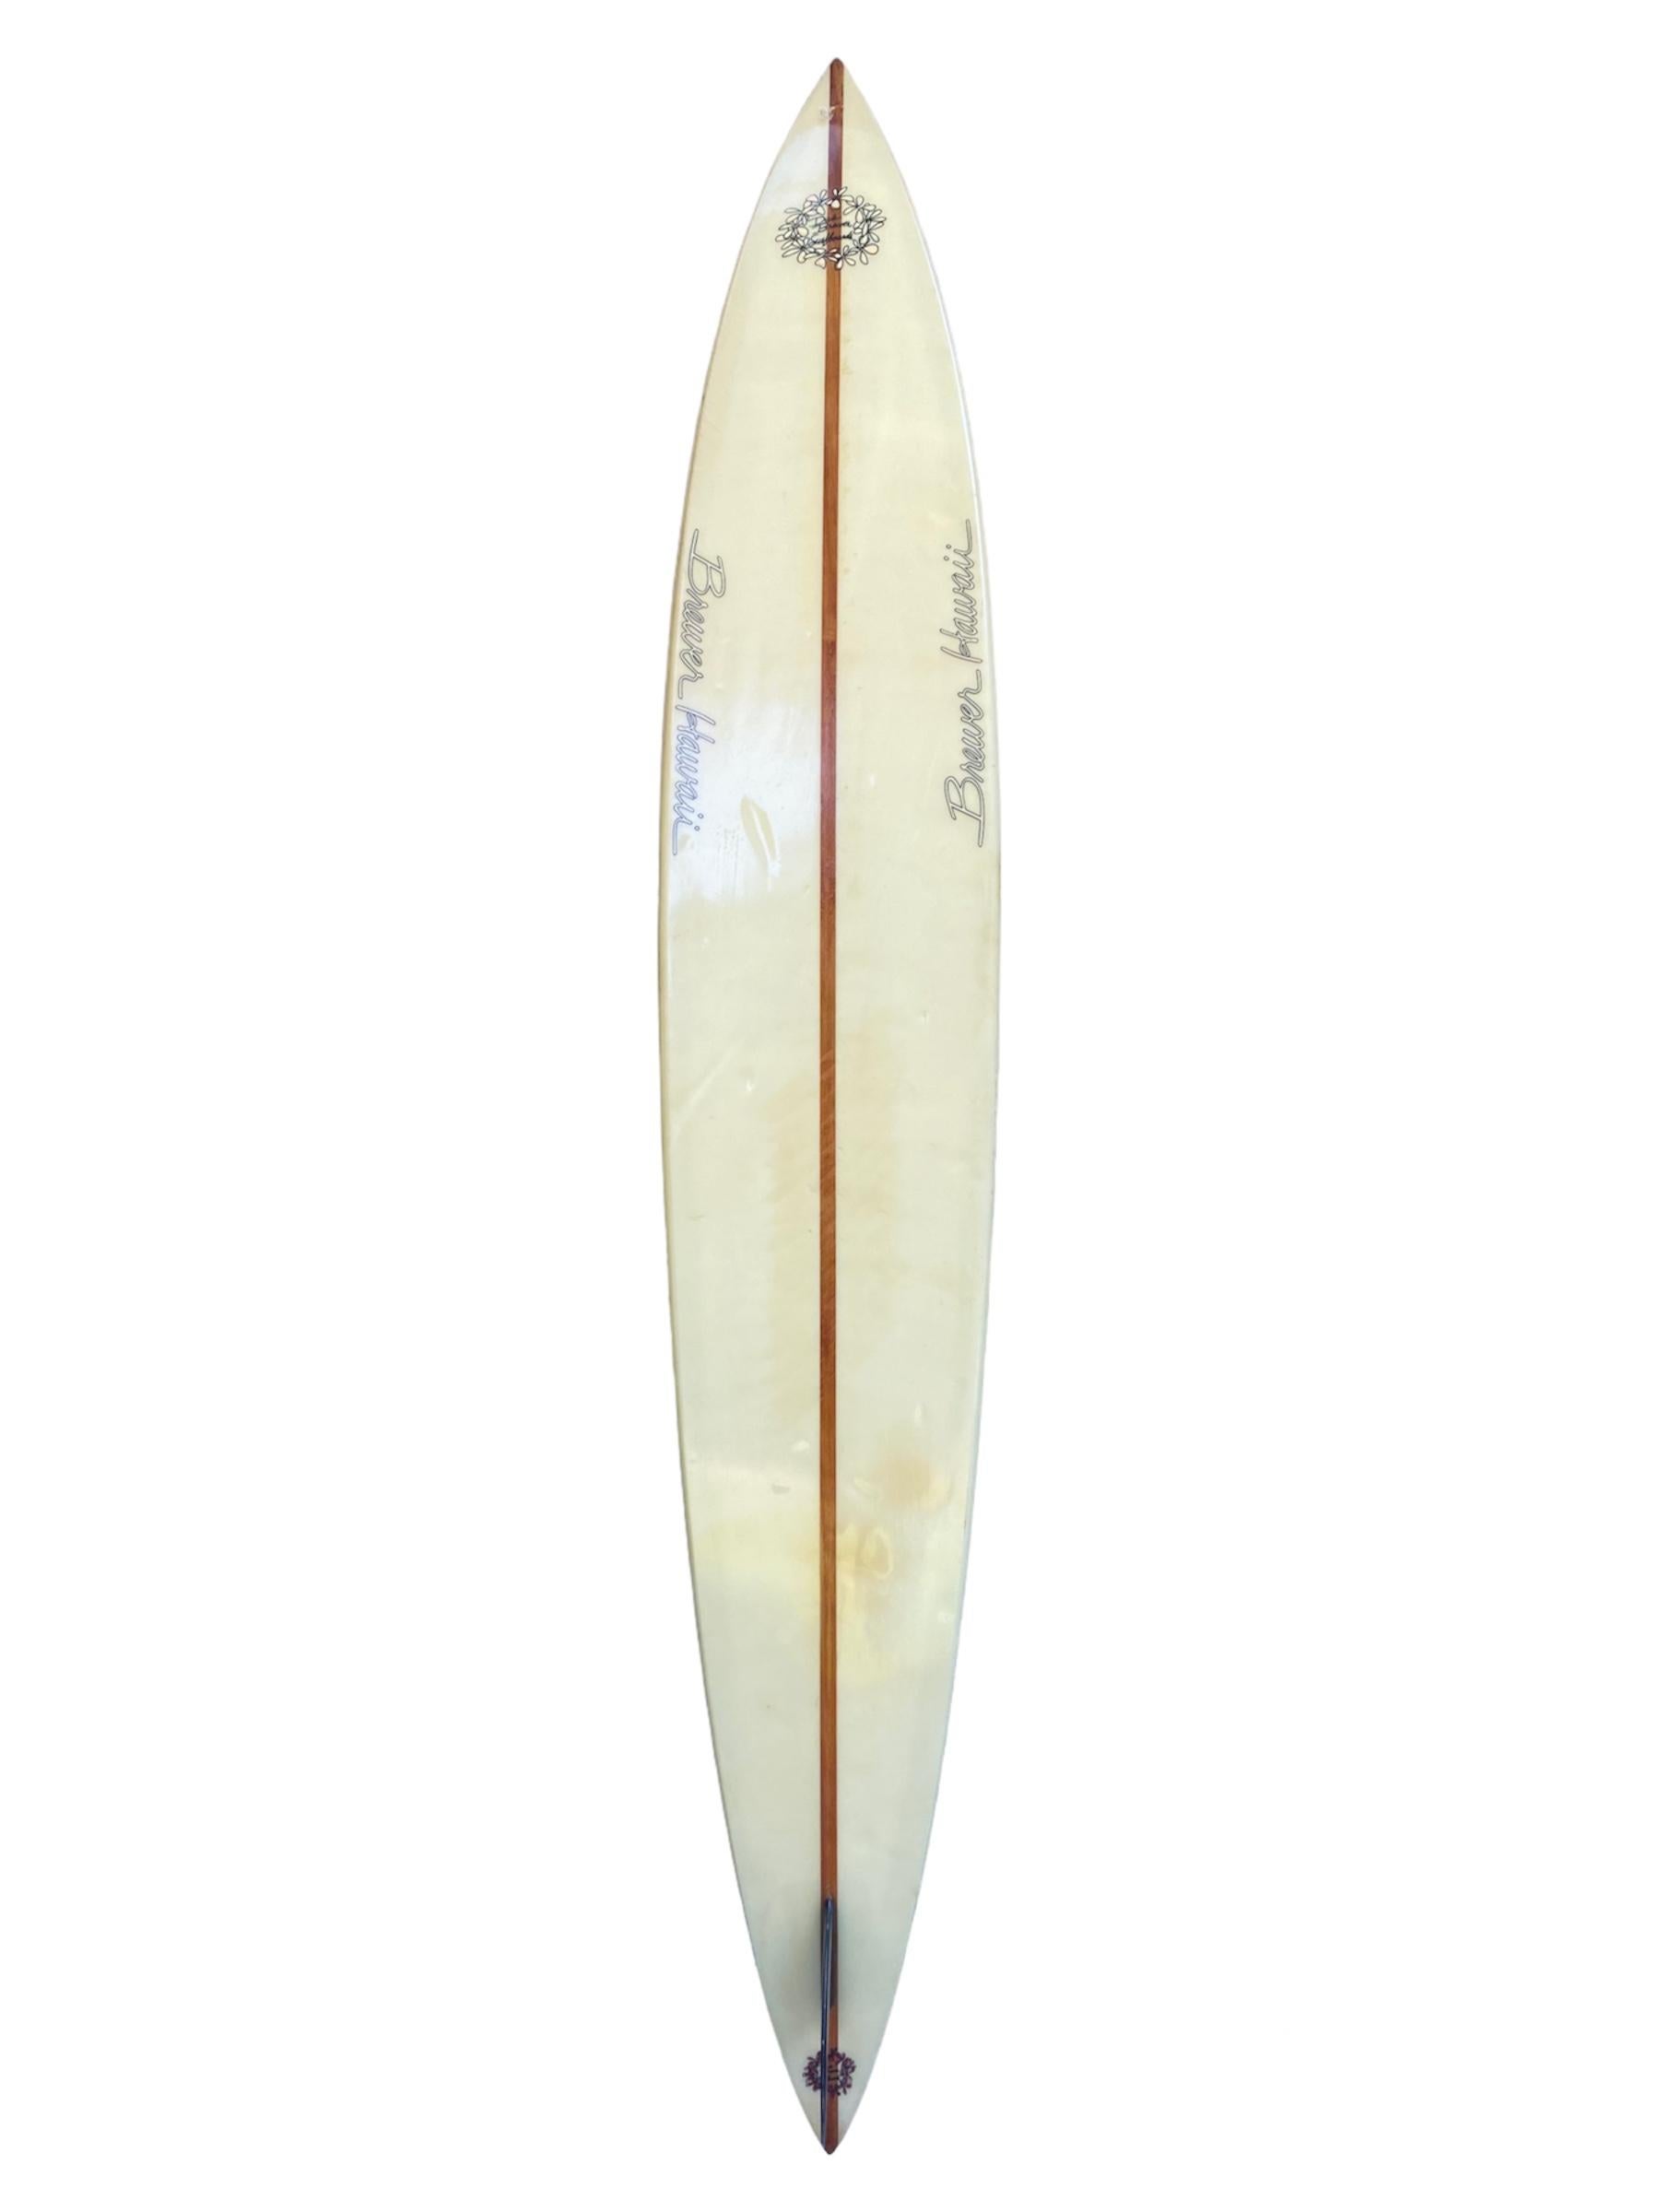 1980s Vintage Dick Brewer Surfboards Team Rider surfboard. Roger Erickson’s personal surfboard. Shaped by Owl Chapman in the late 80s-early 90s. Features Waimea Bay big wave 11’9” pintail shape with signature dual black stripes Erickson’s boards